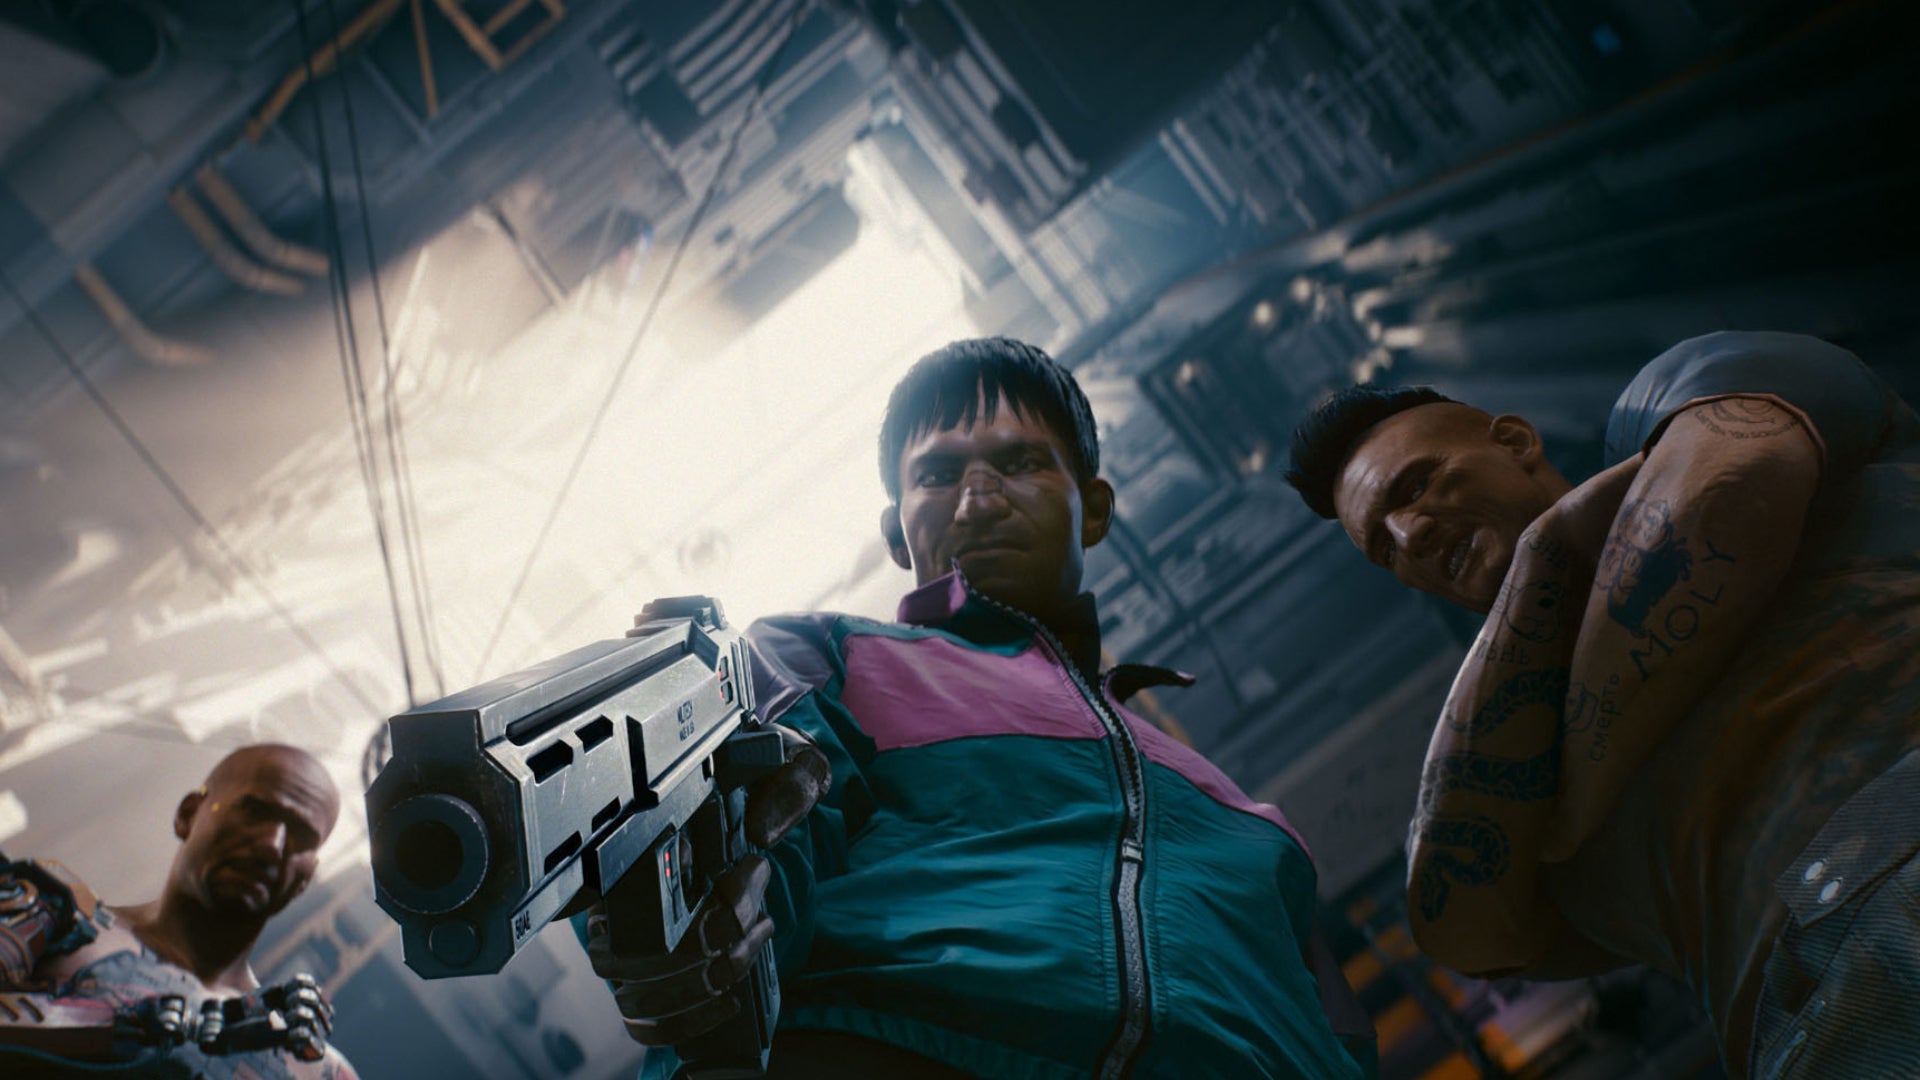 A worm's eye view of three gang members in Cyberpunk 2077. The middle gang member has a gun drawn and is pointing it downwards towards the camera.